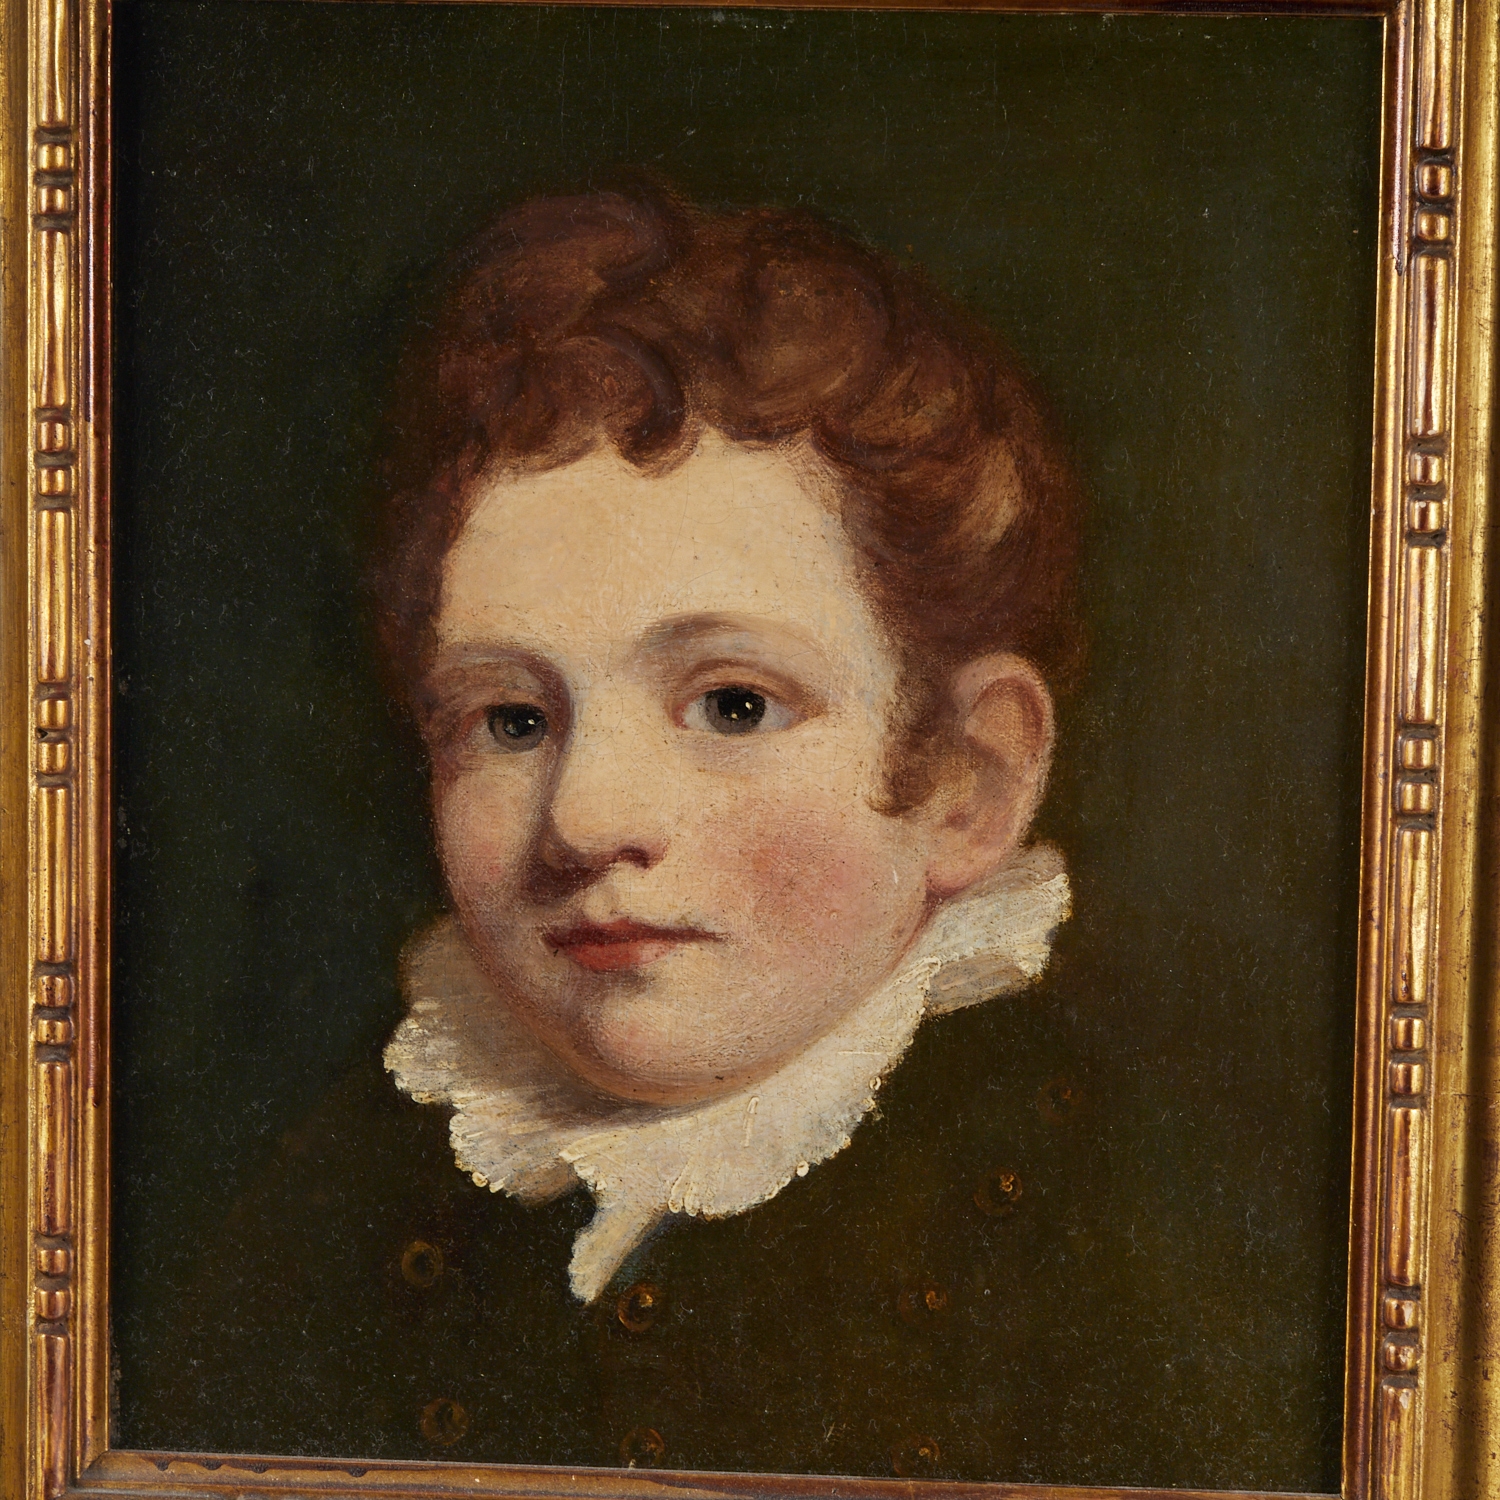 Portrait of a young boy with red hair by Sir Joshua Reynolds